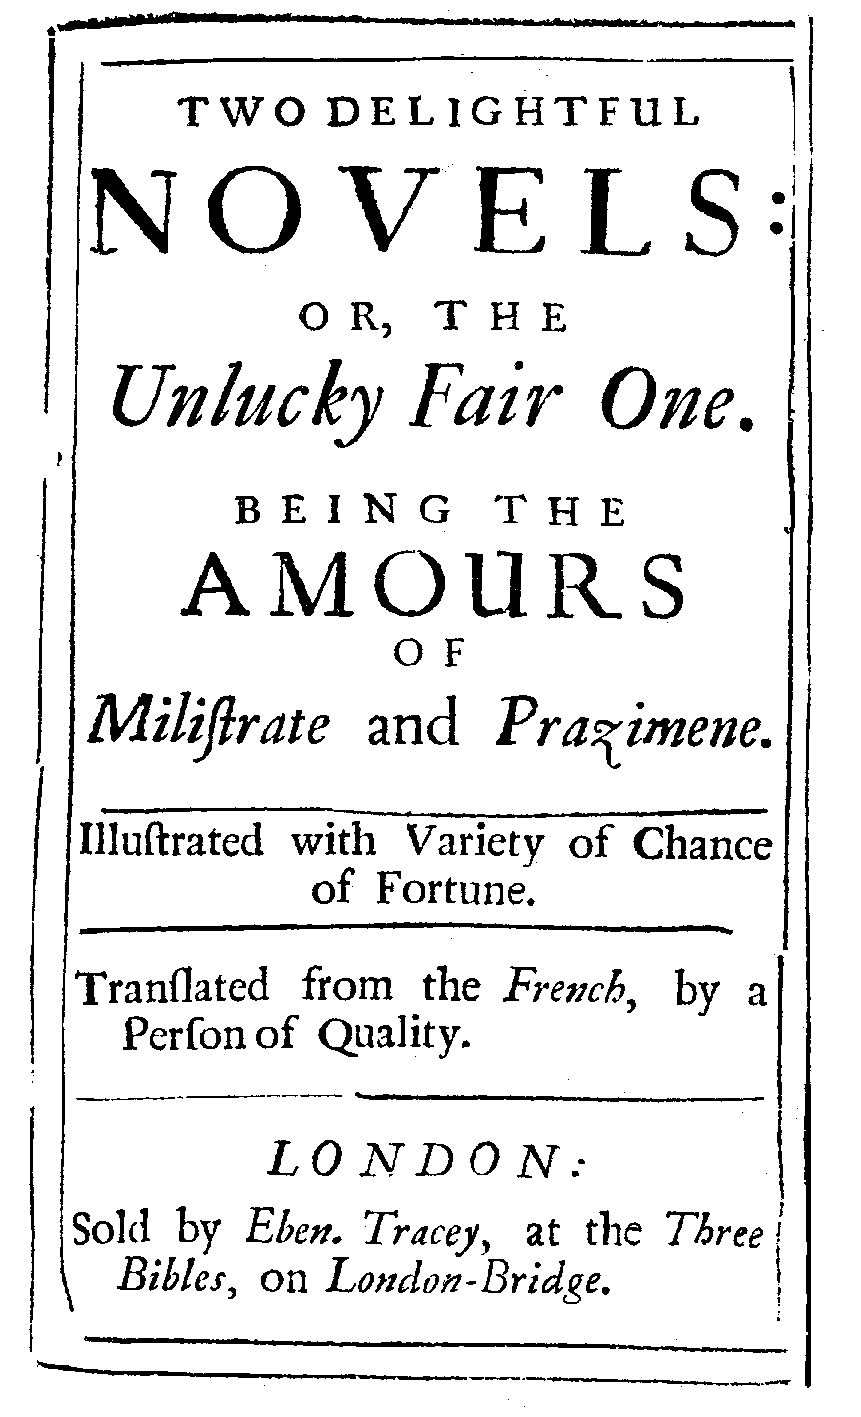 Two Delightful Novels: or, the Unlucky Fair One. Being the Amours of Milistrate and Prazimene (London: E. Tracey, [1710]).